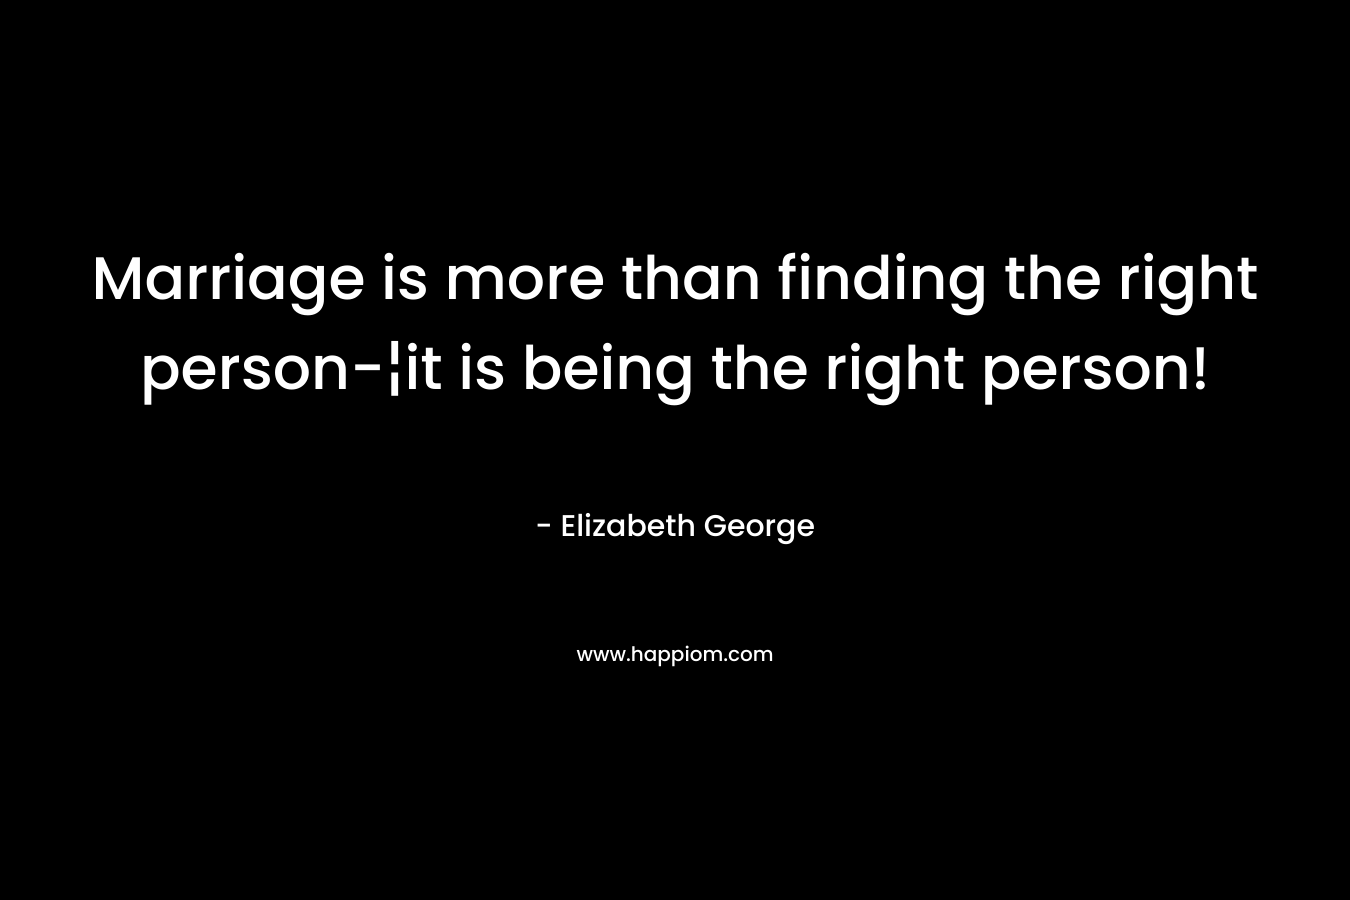 Marriage is more than finding the right person-¦it is being the right person!